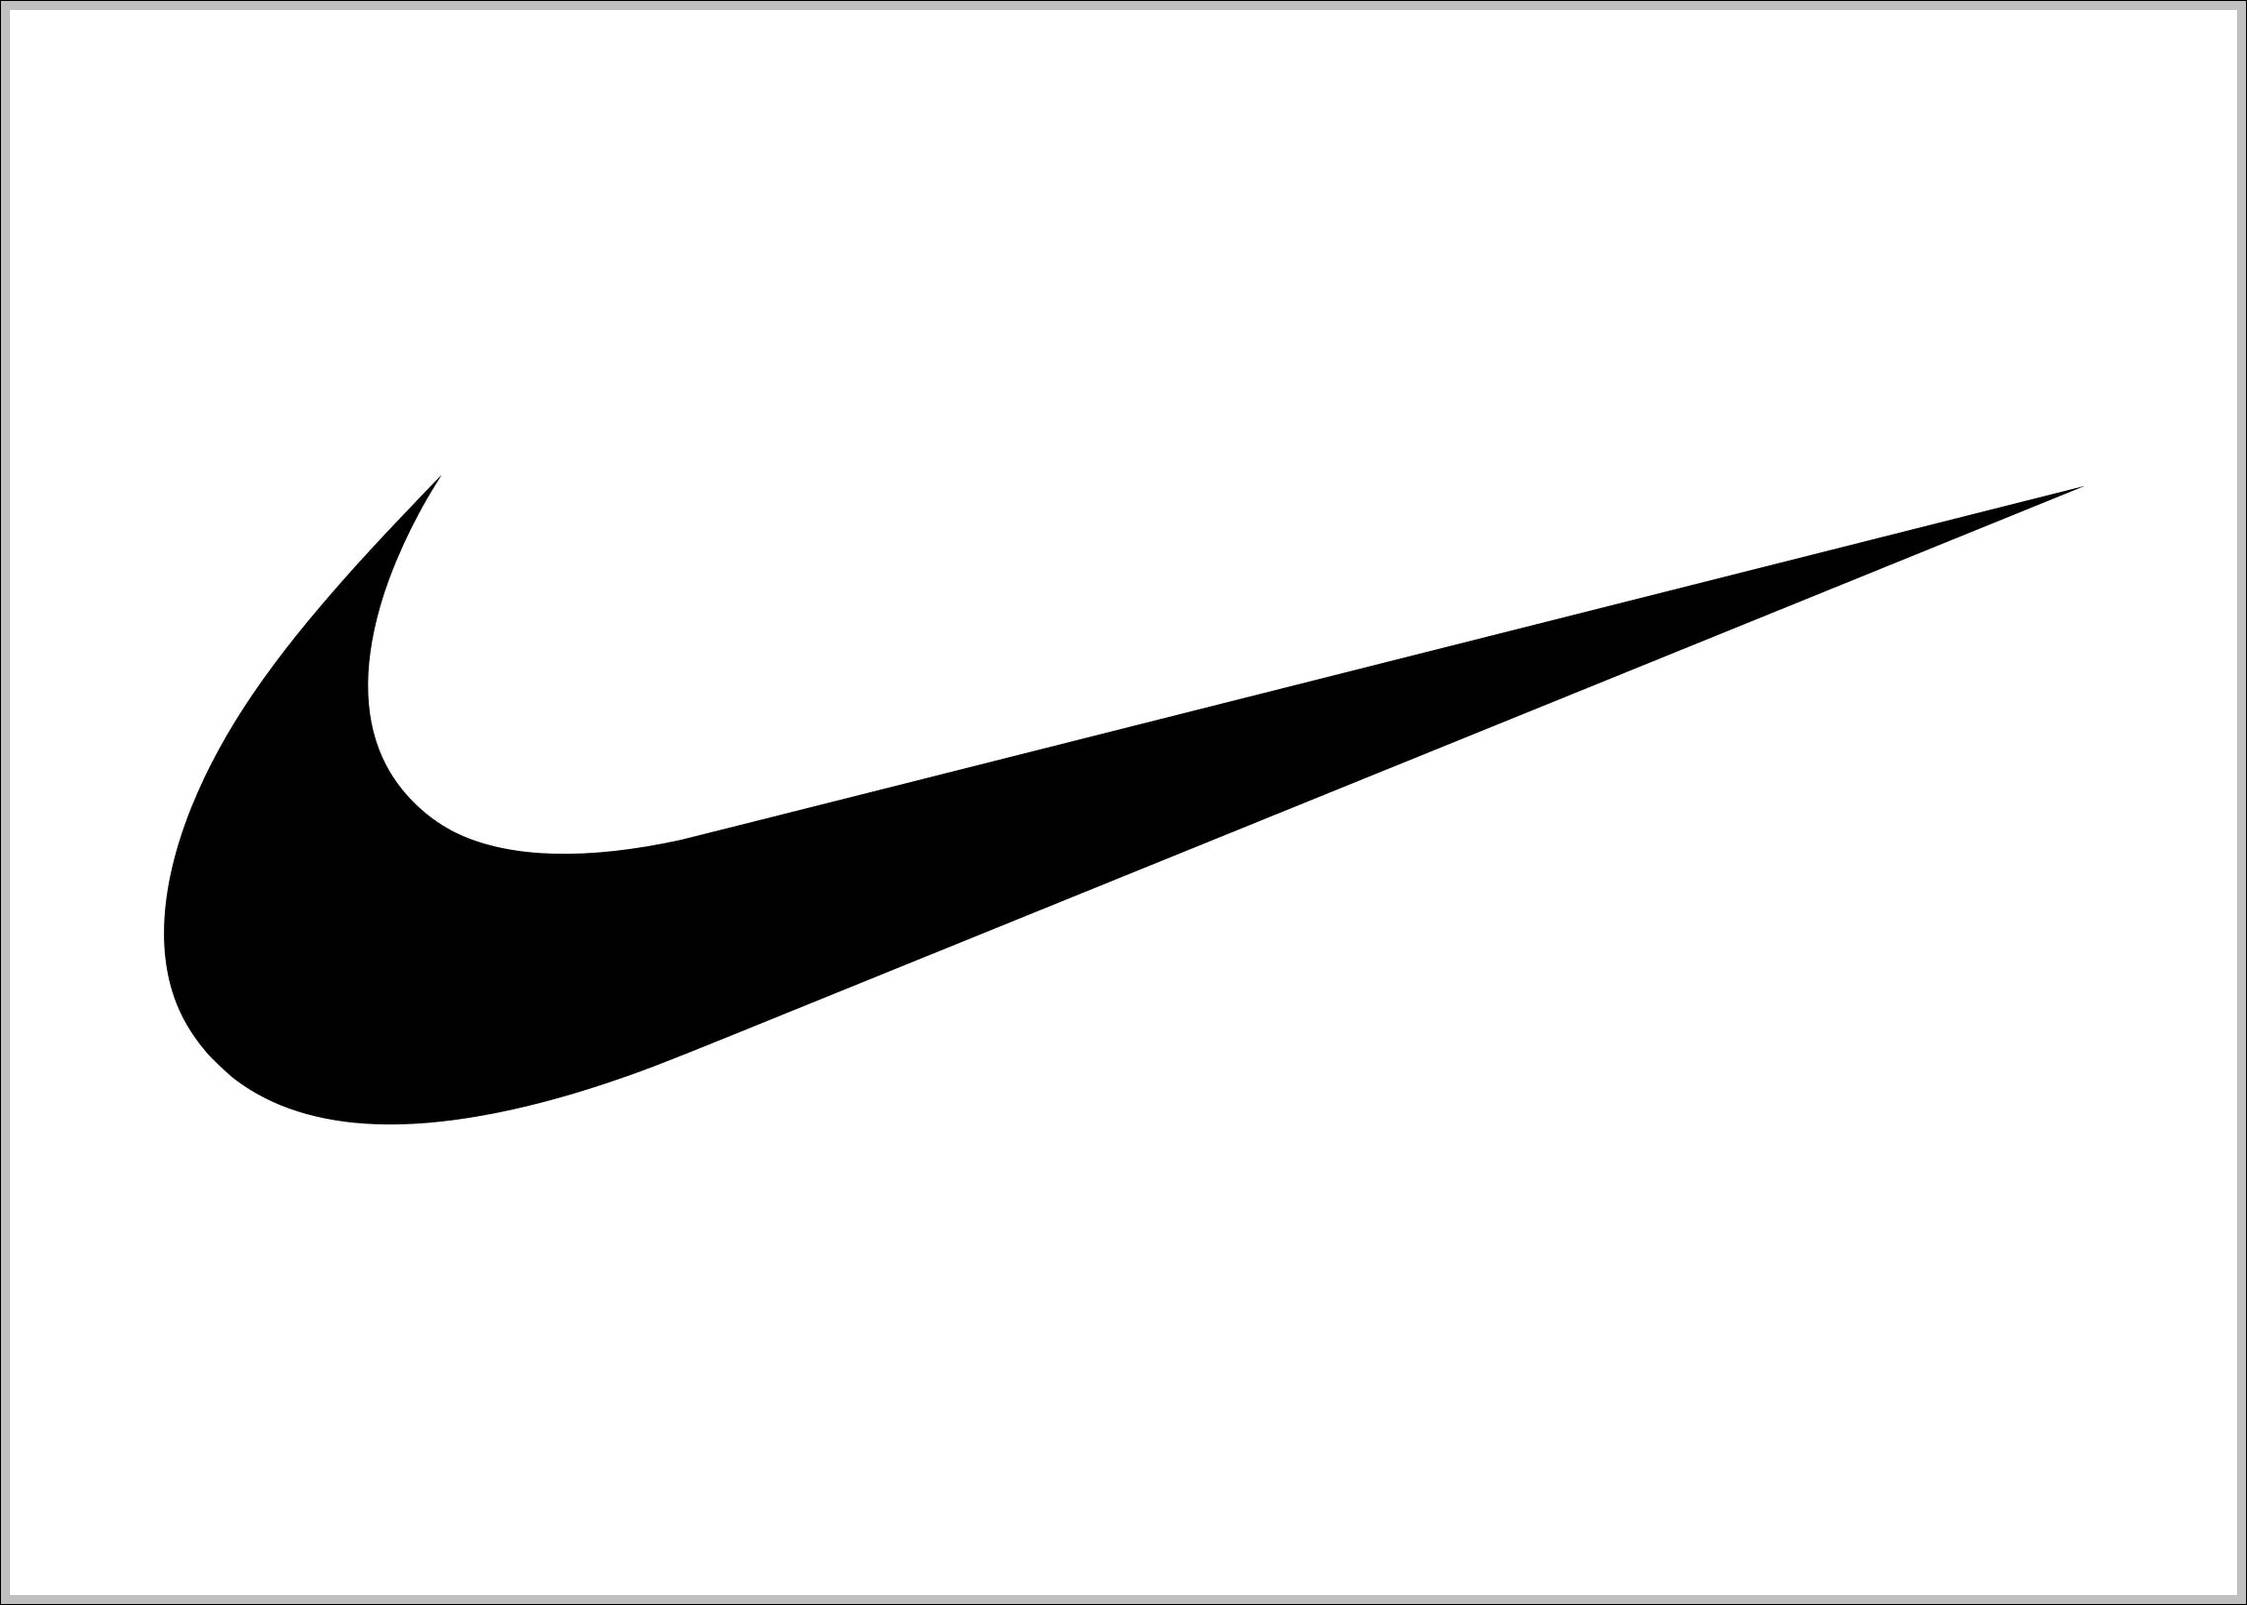 pictures of nike symbols